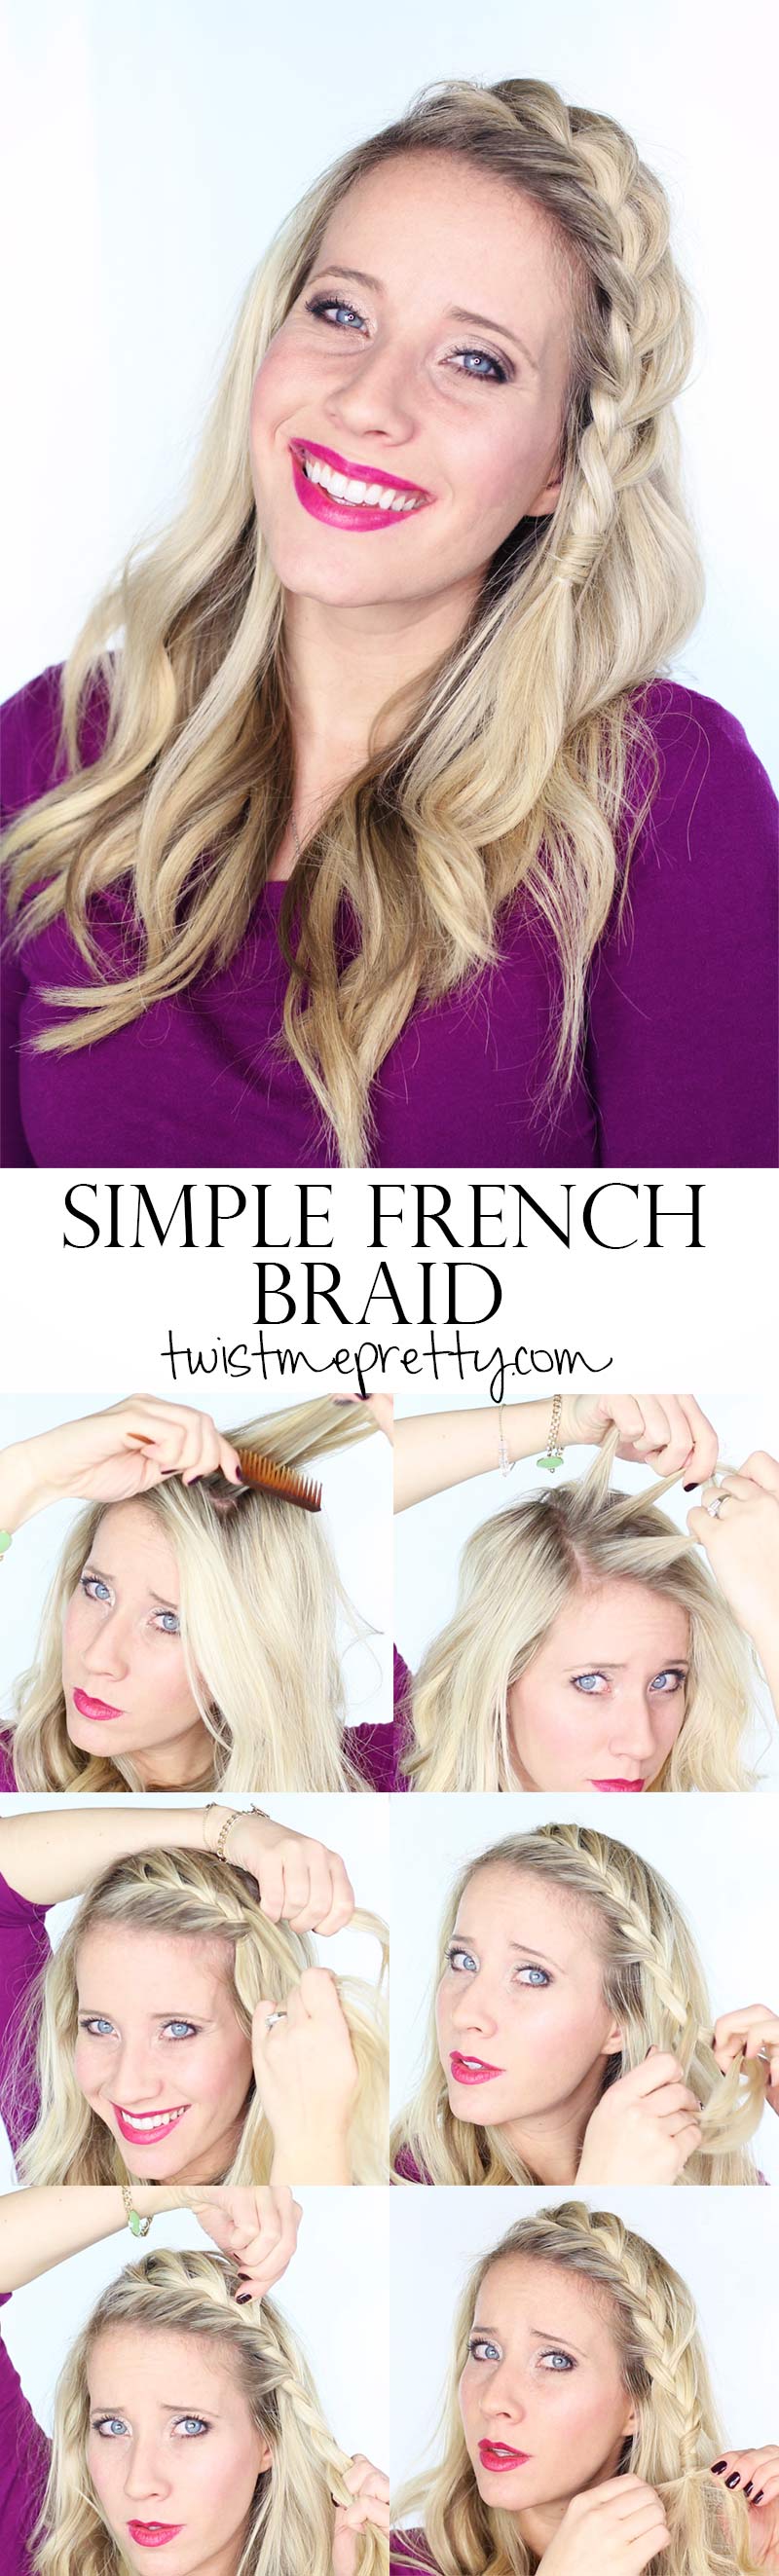 10 Braided Hairstyles We Are Completely Obsessed With